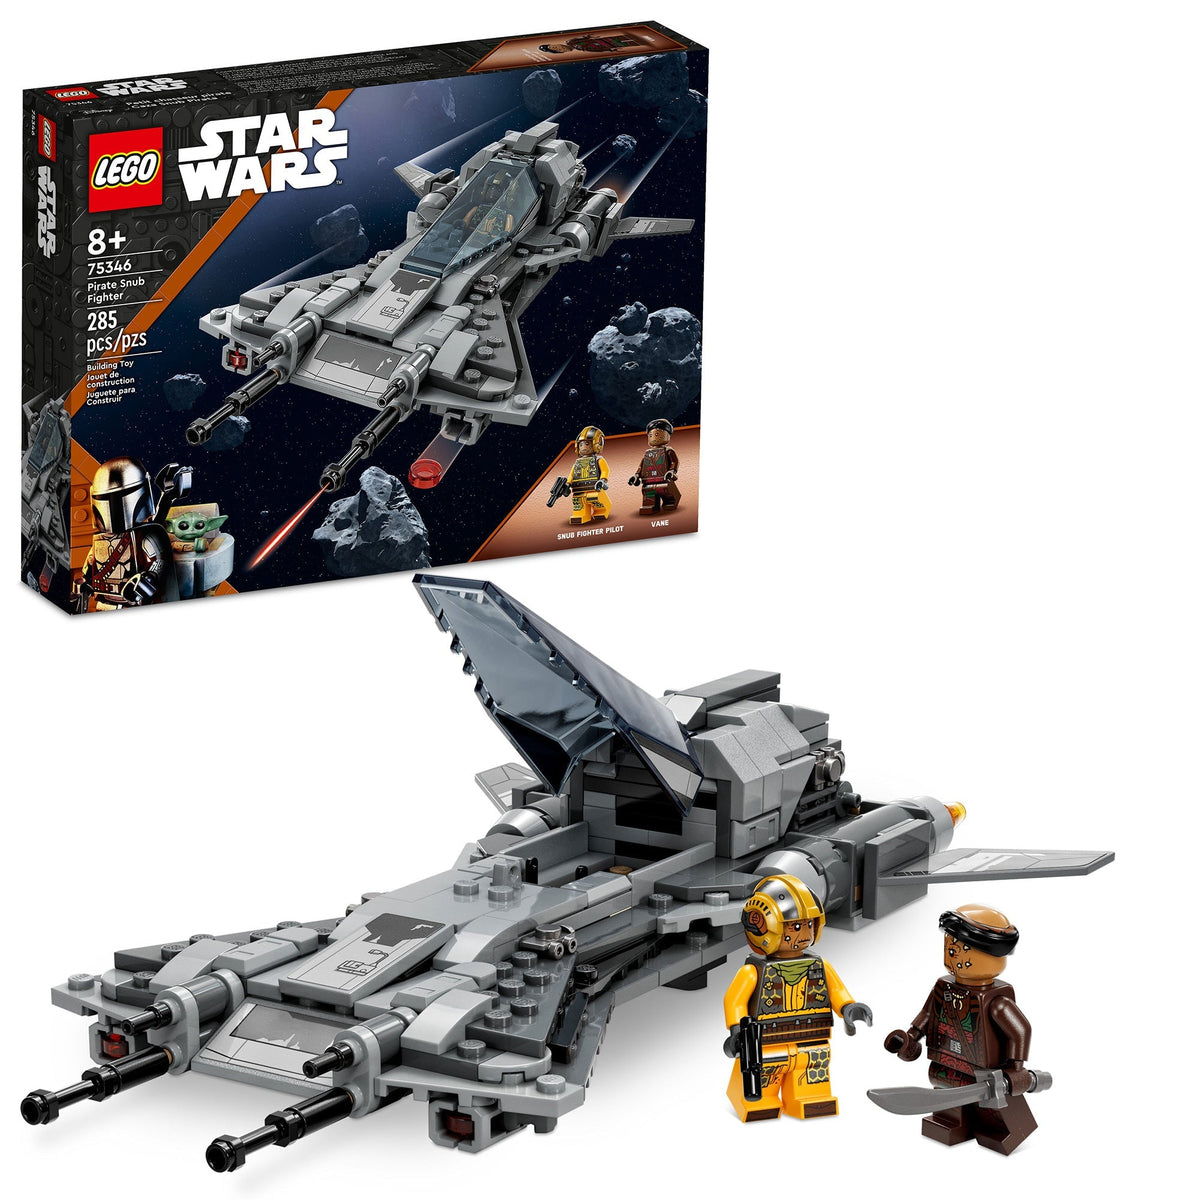 LEGO Toys & Games LEGO Star Wars Pirate Snub Fighter, 75346, Ages 8+, 285 Pieces